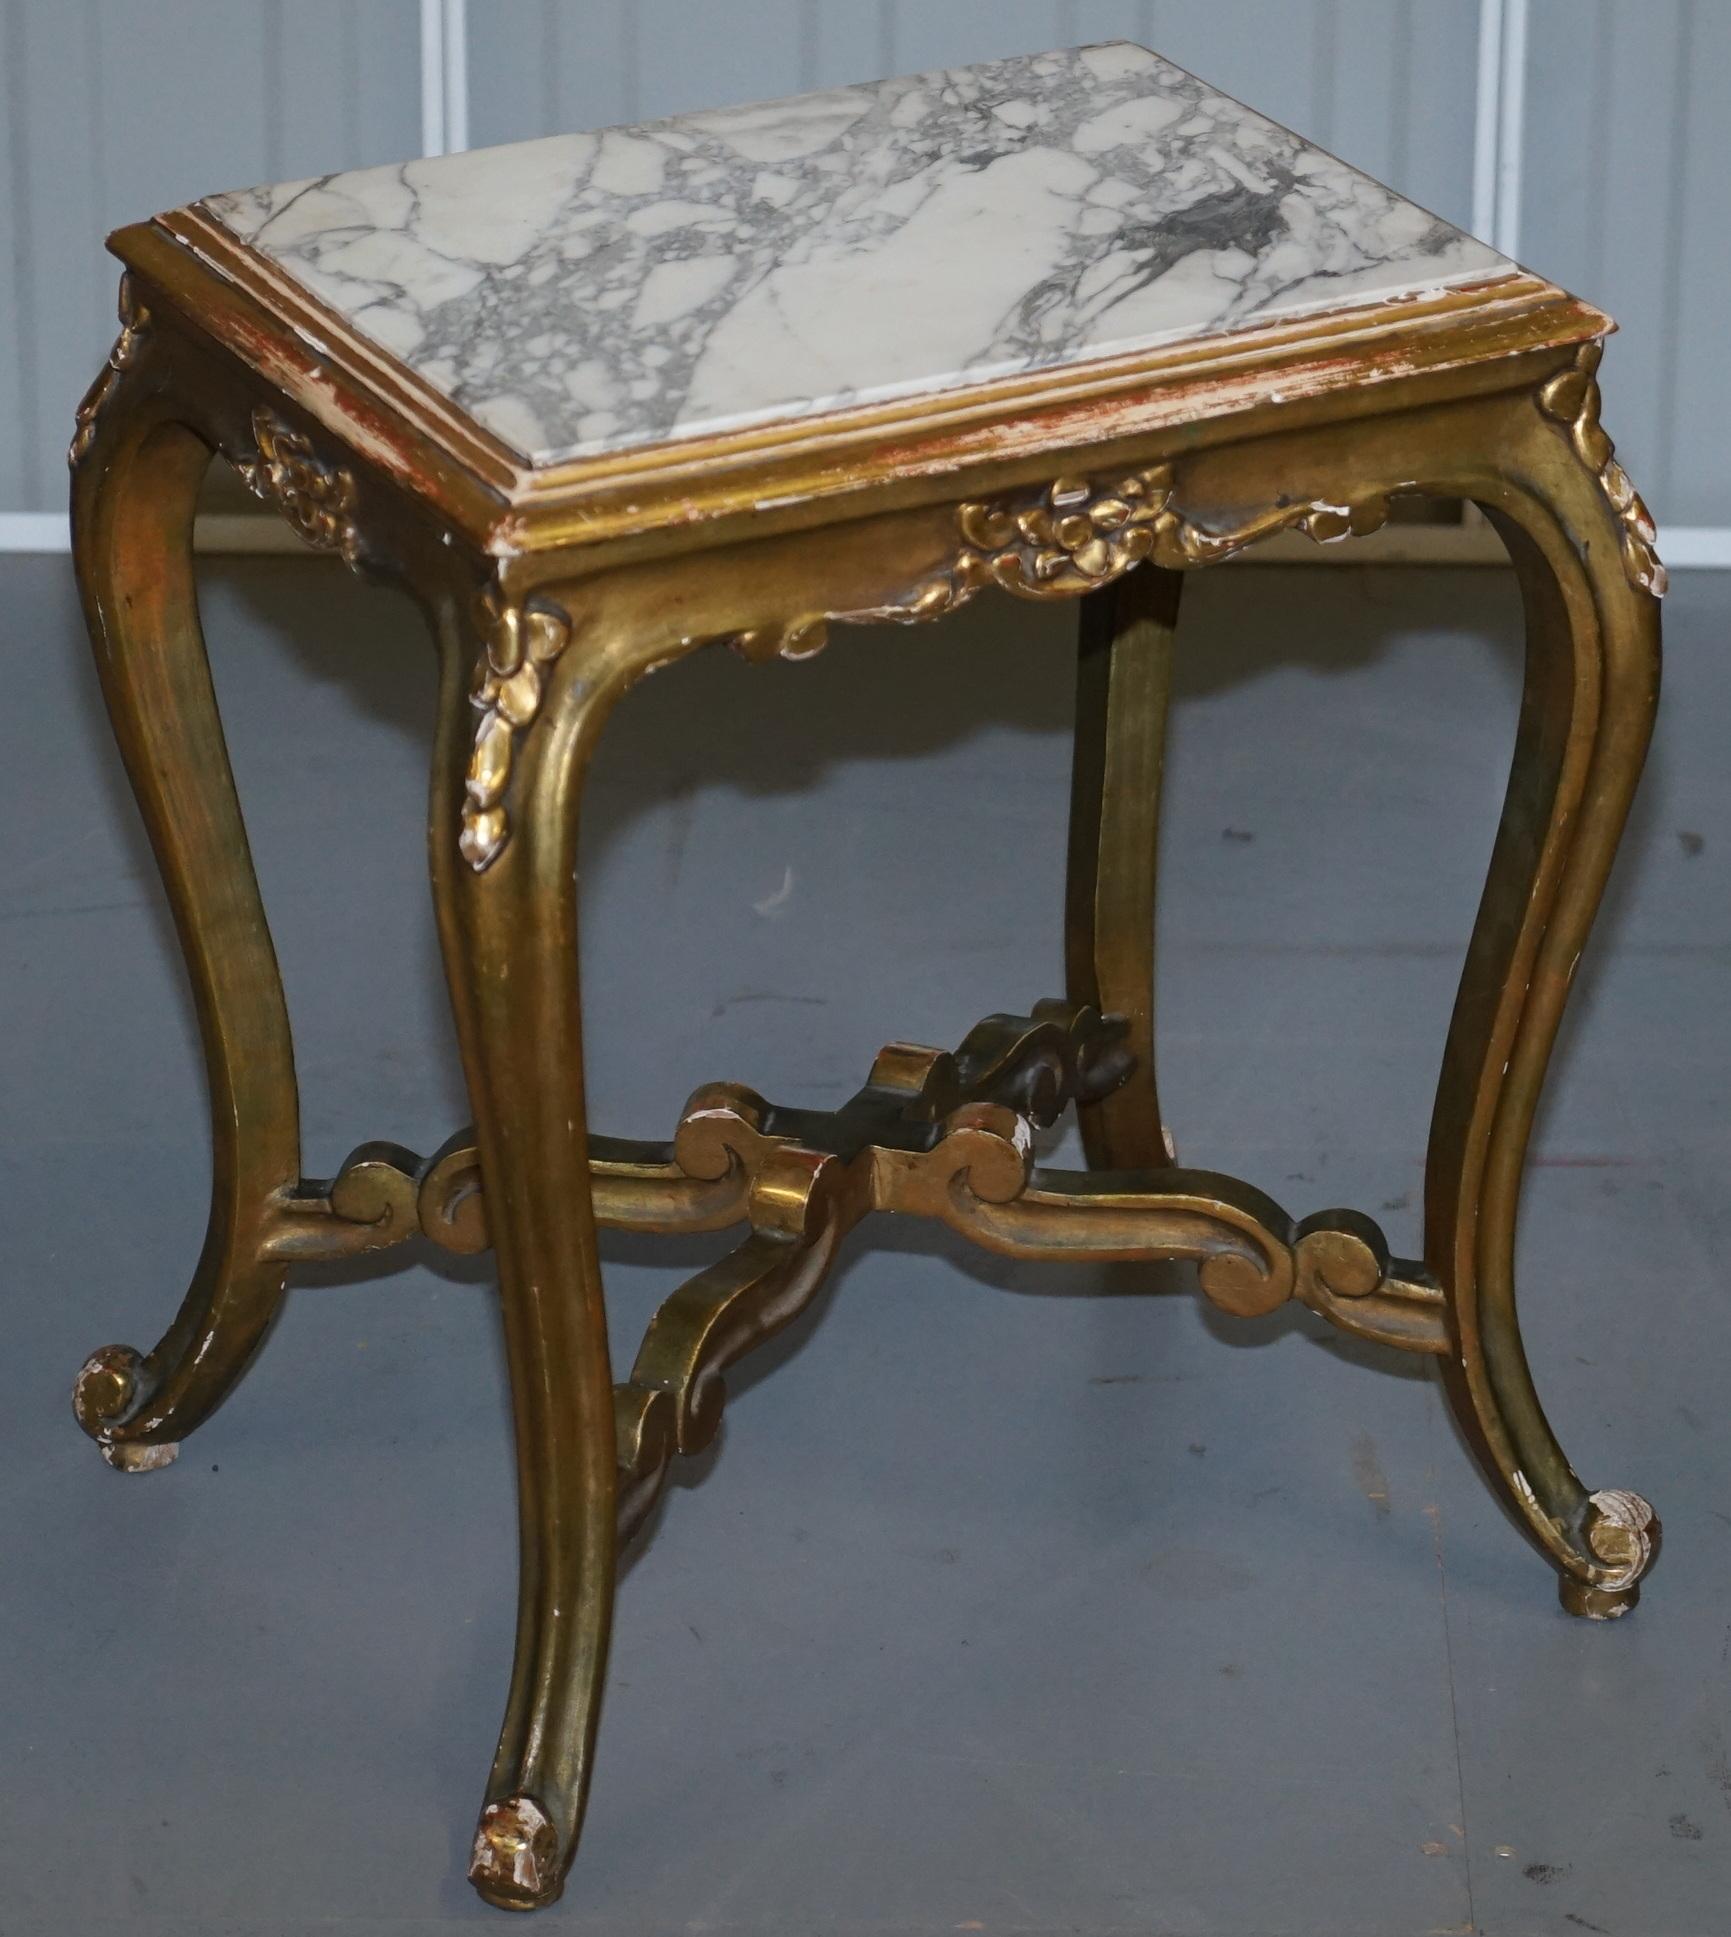 We are delighted to offer for sale this lovely original pair of circa 1860 Napoleon III gold giltwood, marble topped, side tables

A totally original pair, the hardwood frames have been nicely gold gilt, they have aged and worn as you would expect